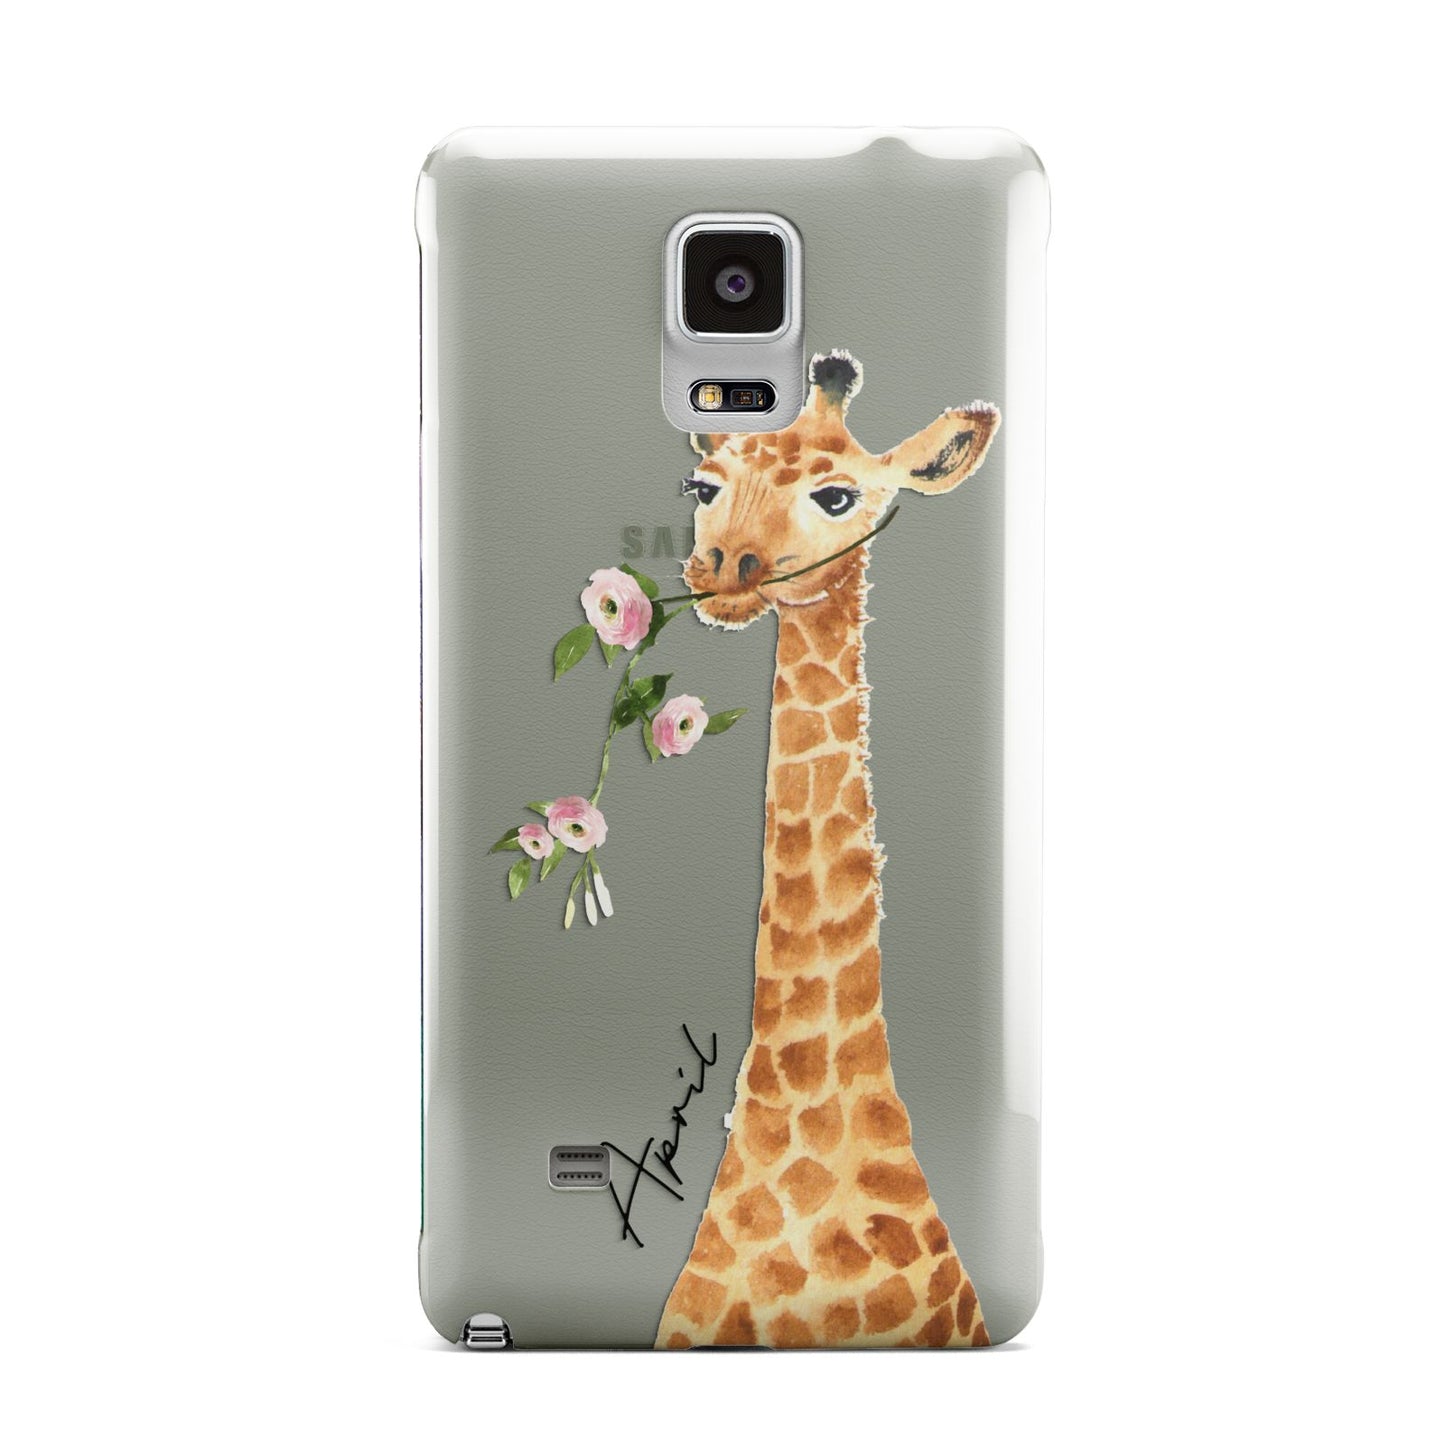 Personalised Giraffe with Name Samsung Galaxy Note 4 Case